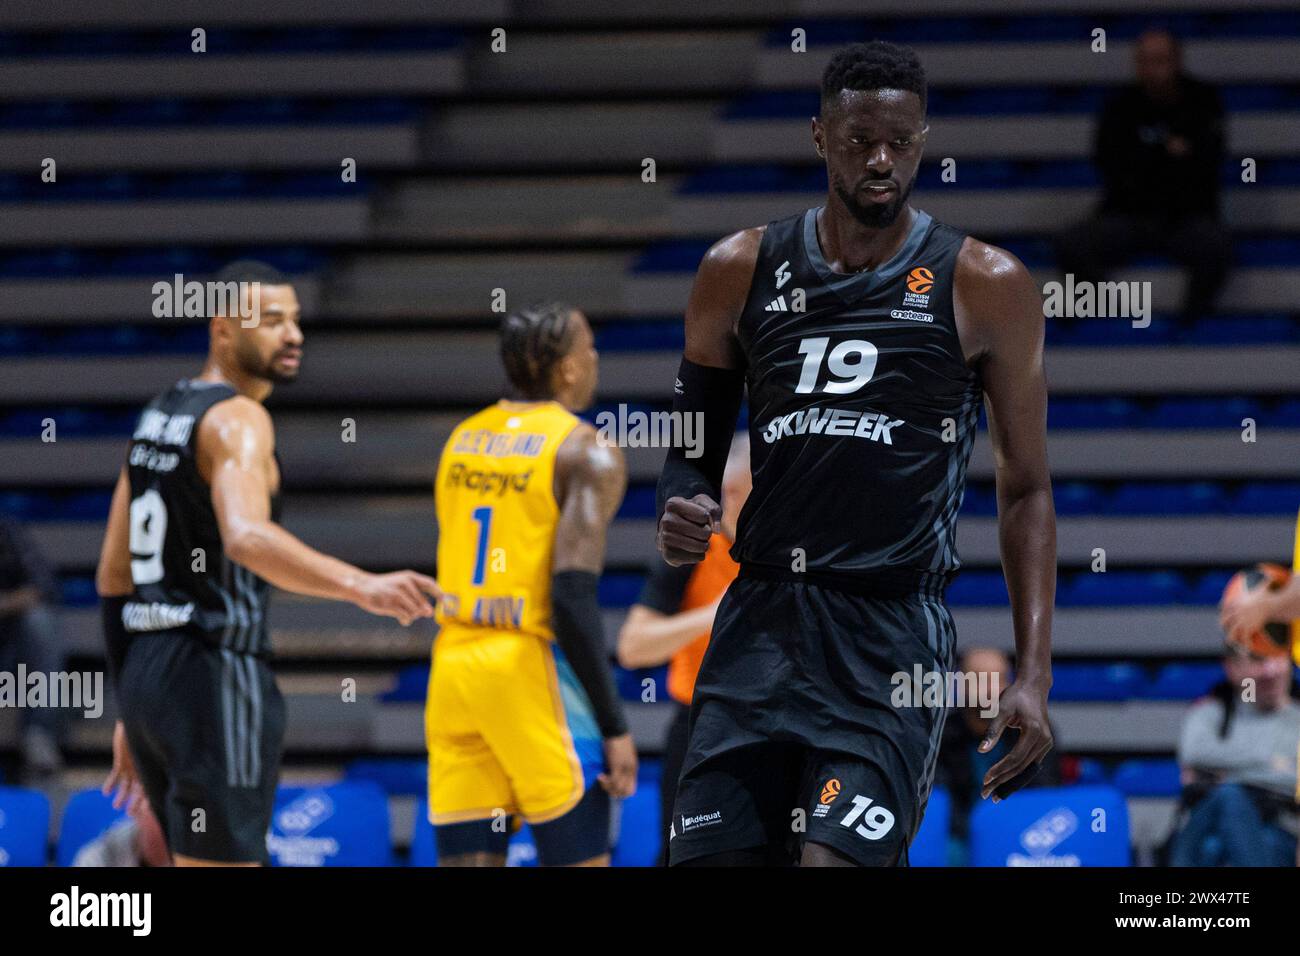 Belgrade, Serbia, 19 March, 2023. Youssoupha Fall of Ldlc Asvel Villeurbanne reacts during the 2023/2024 Turkish Airlines EuroLeague, Round 30 match between Maccabi Playtika Tel Aviv and Ldlc Asvel Villeurbanne at Aleksandar Nikolic Hall in Belgrade, Serbia. March 19, 2023. Credit: Nikola Krstic/Alamy Stock Photo